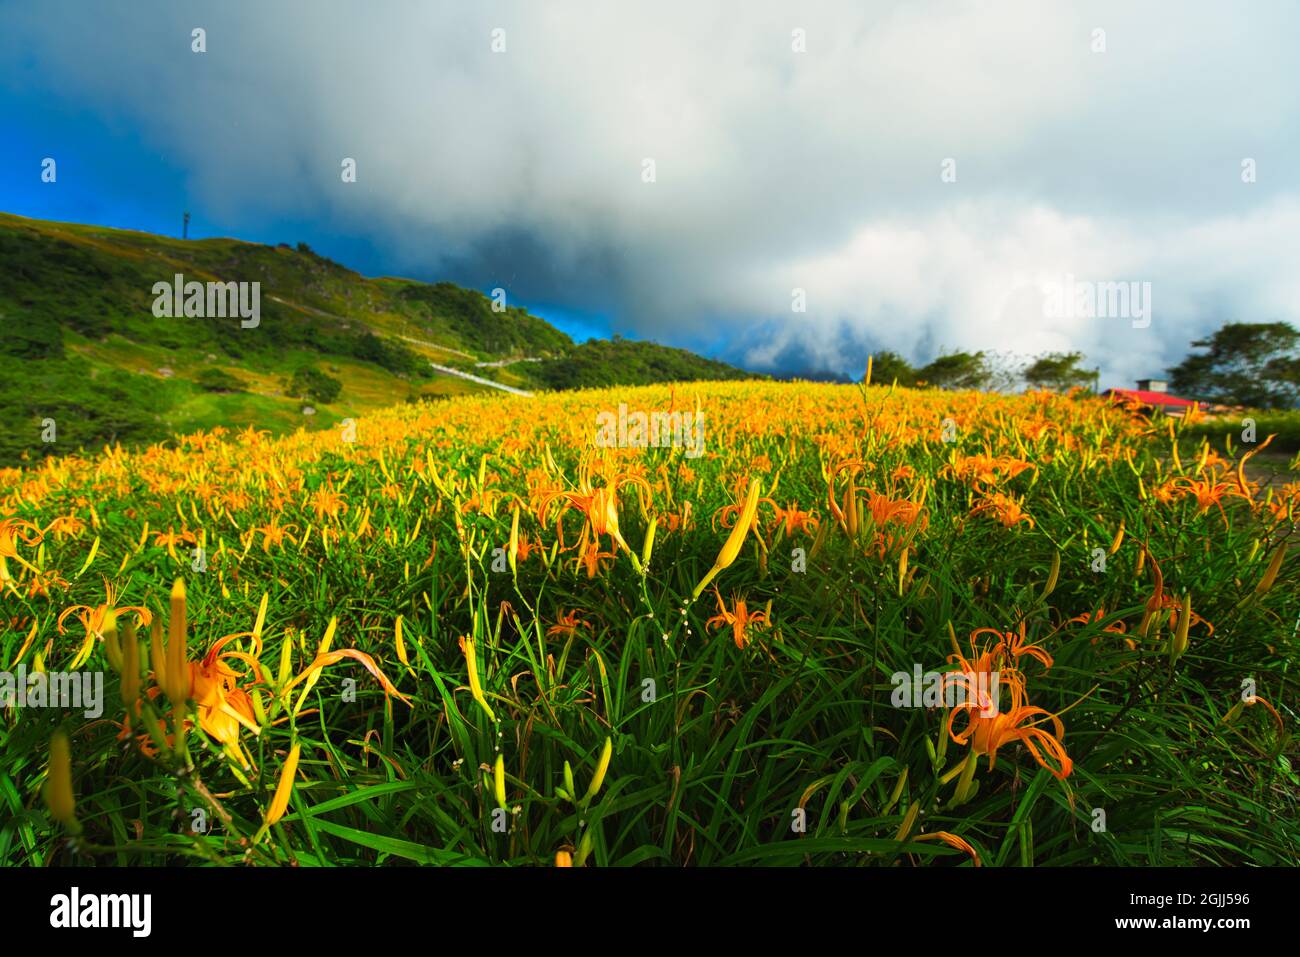 Wild Orange Daylily flowers bloom all over the mountains and fields. Fulvous day-lily, Orange day-lily, Lily, Day Lily, Tawny Daylily. Hualien, Taiwan Stock Photo